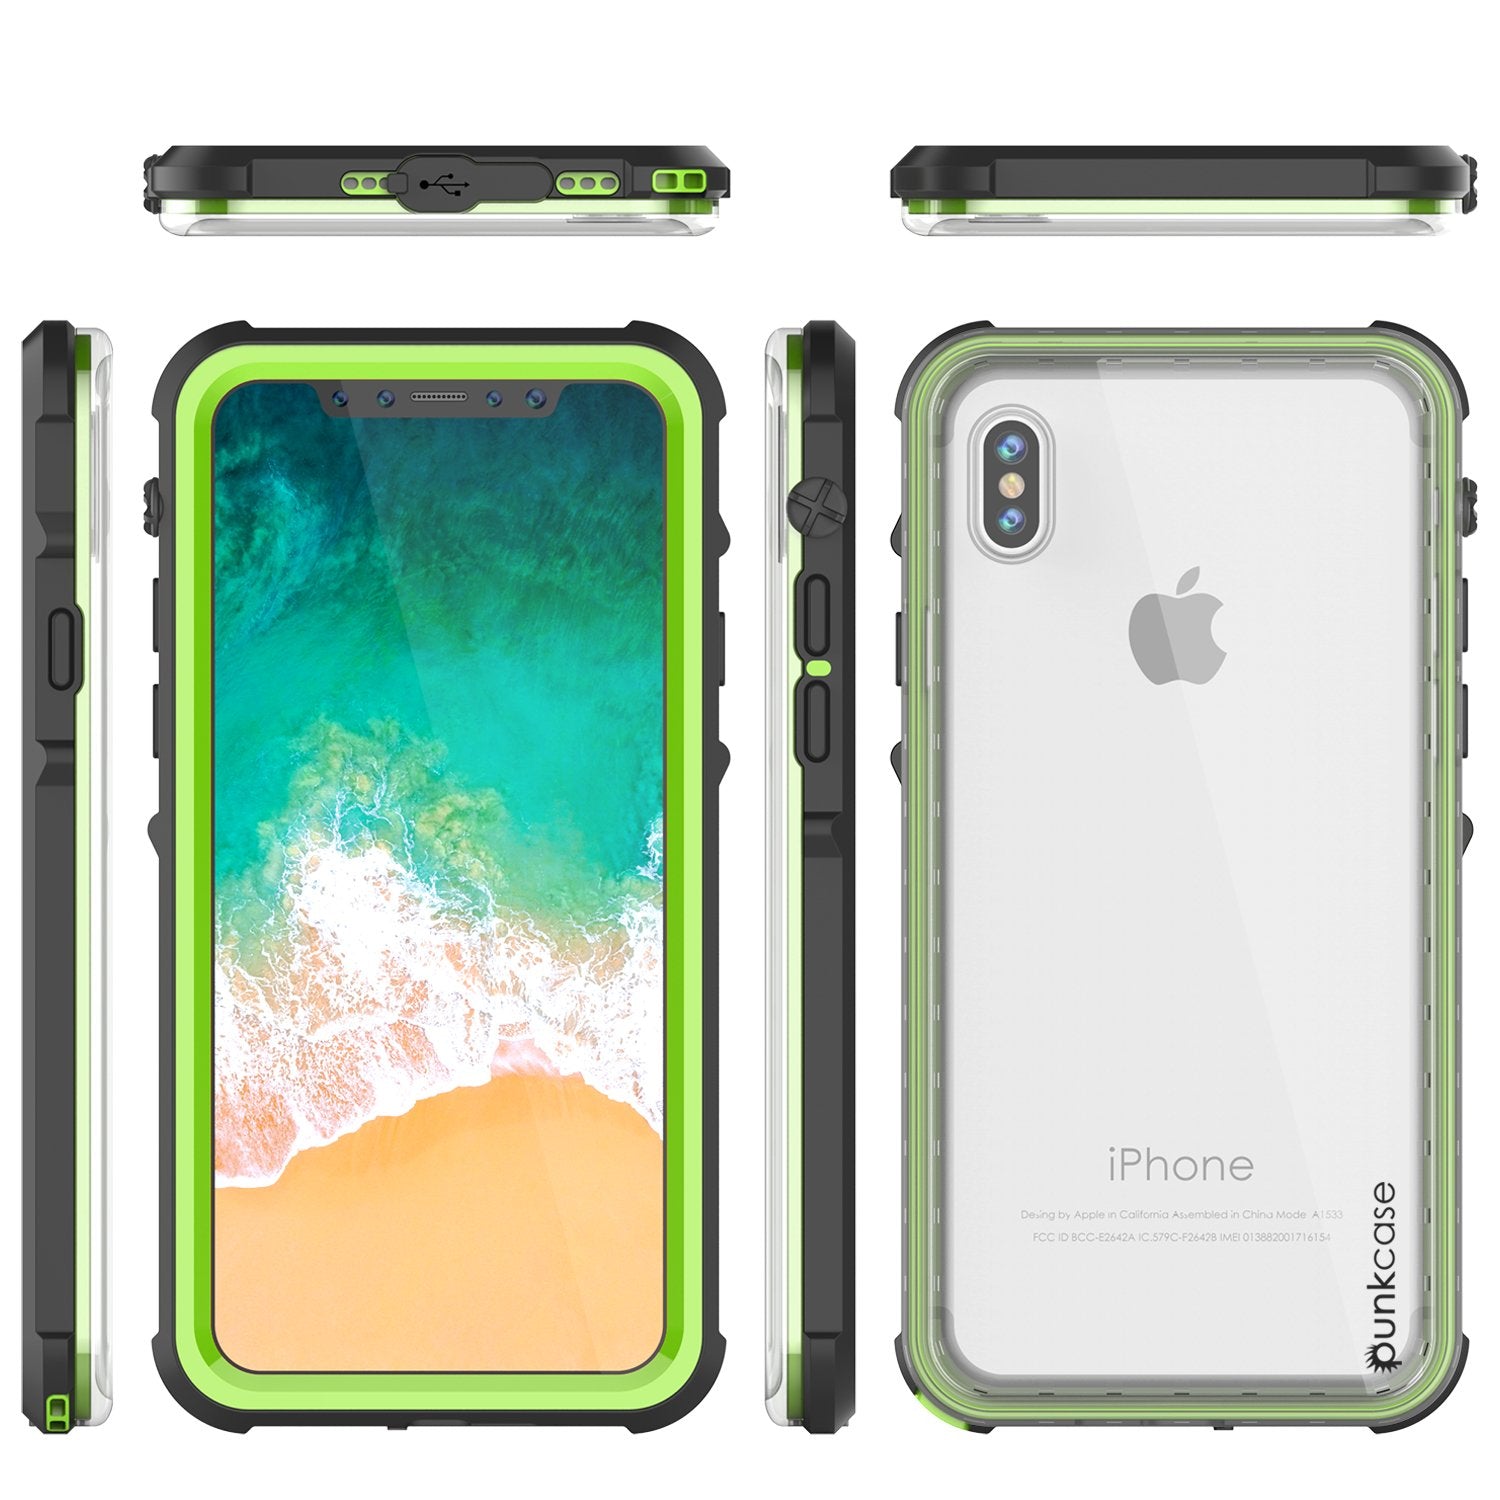 iPhone X Case, PUNKCase [CRYSTAL SERIES] Protective IP68 Certified Cover W/ Attached Screen Protector - DustPROOF, ShockPROOF, SnowPROOF - Ultra Slim Fit for Apple iPhone 10 [LIGHT GREEN]